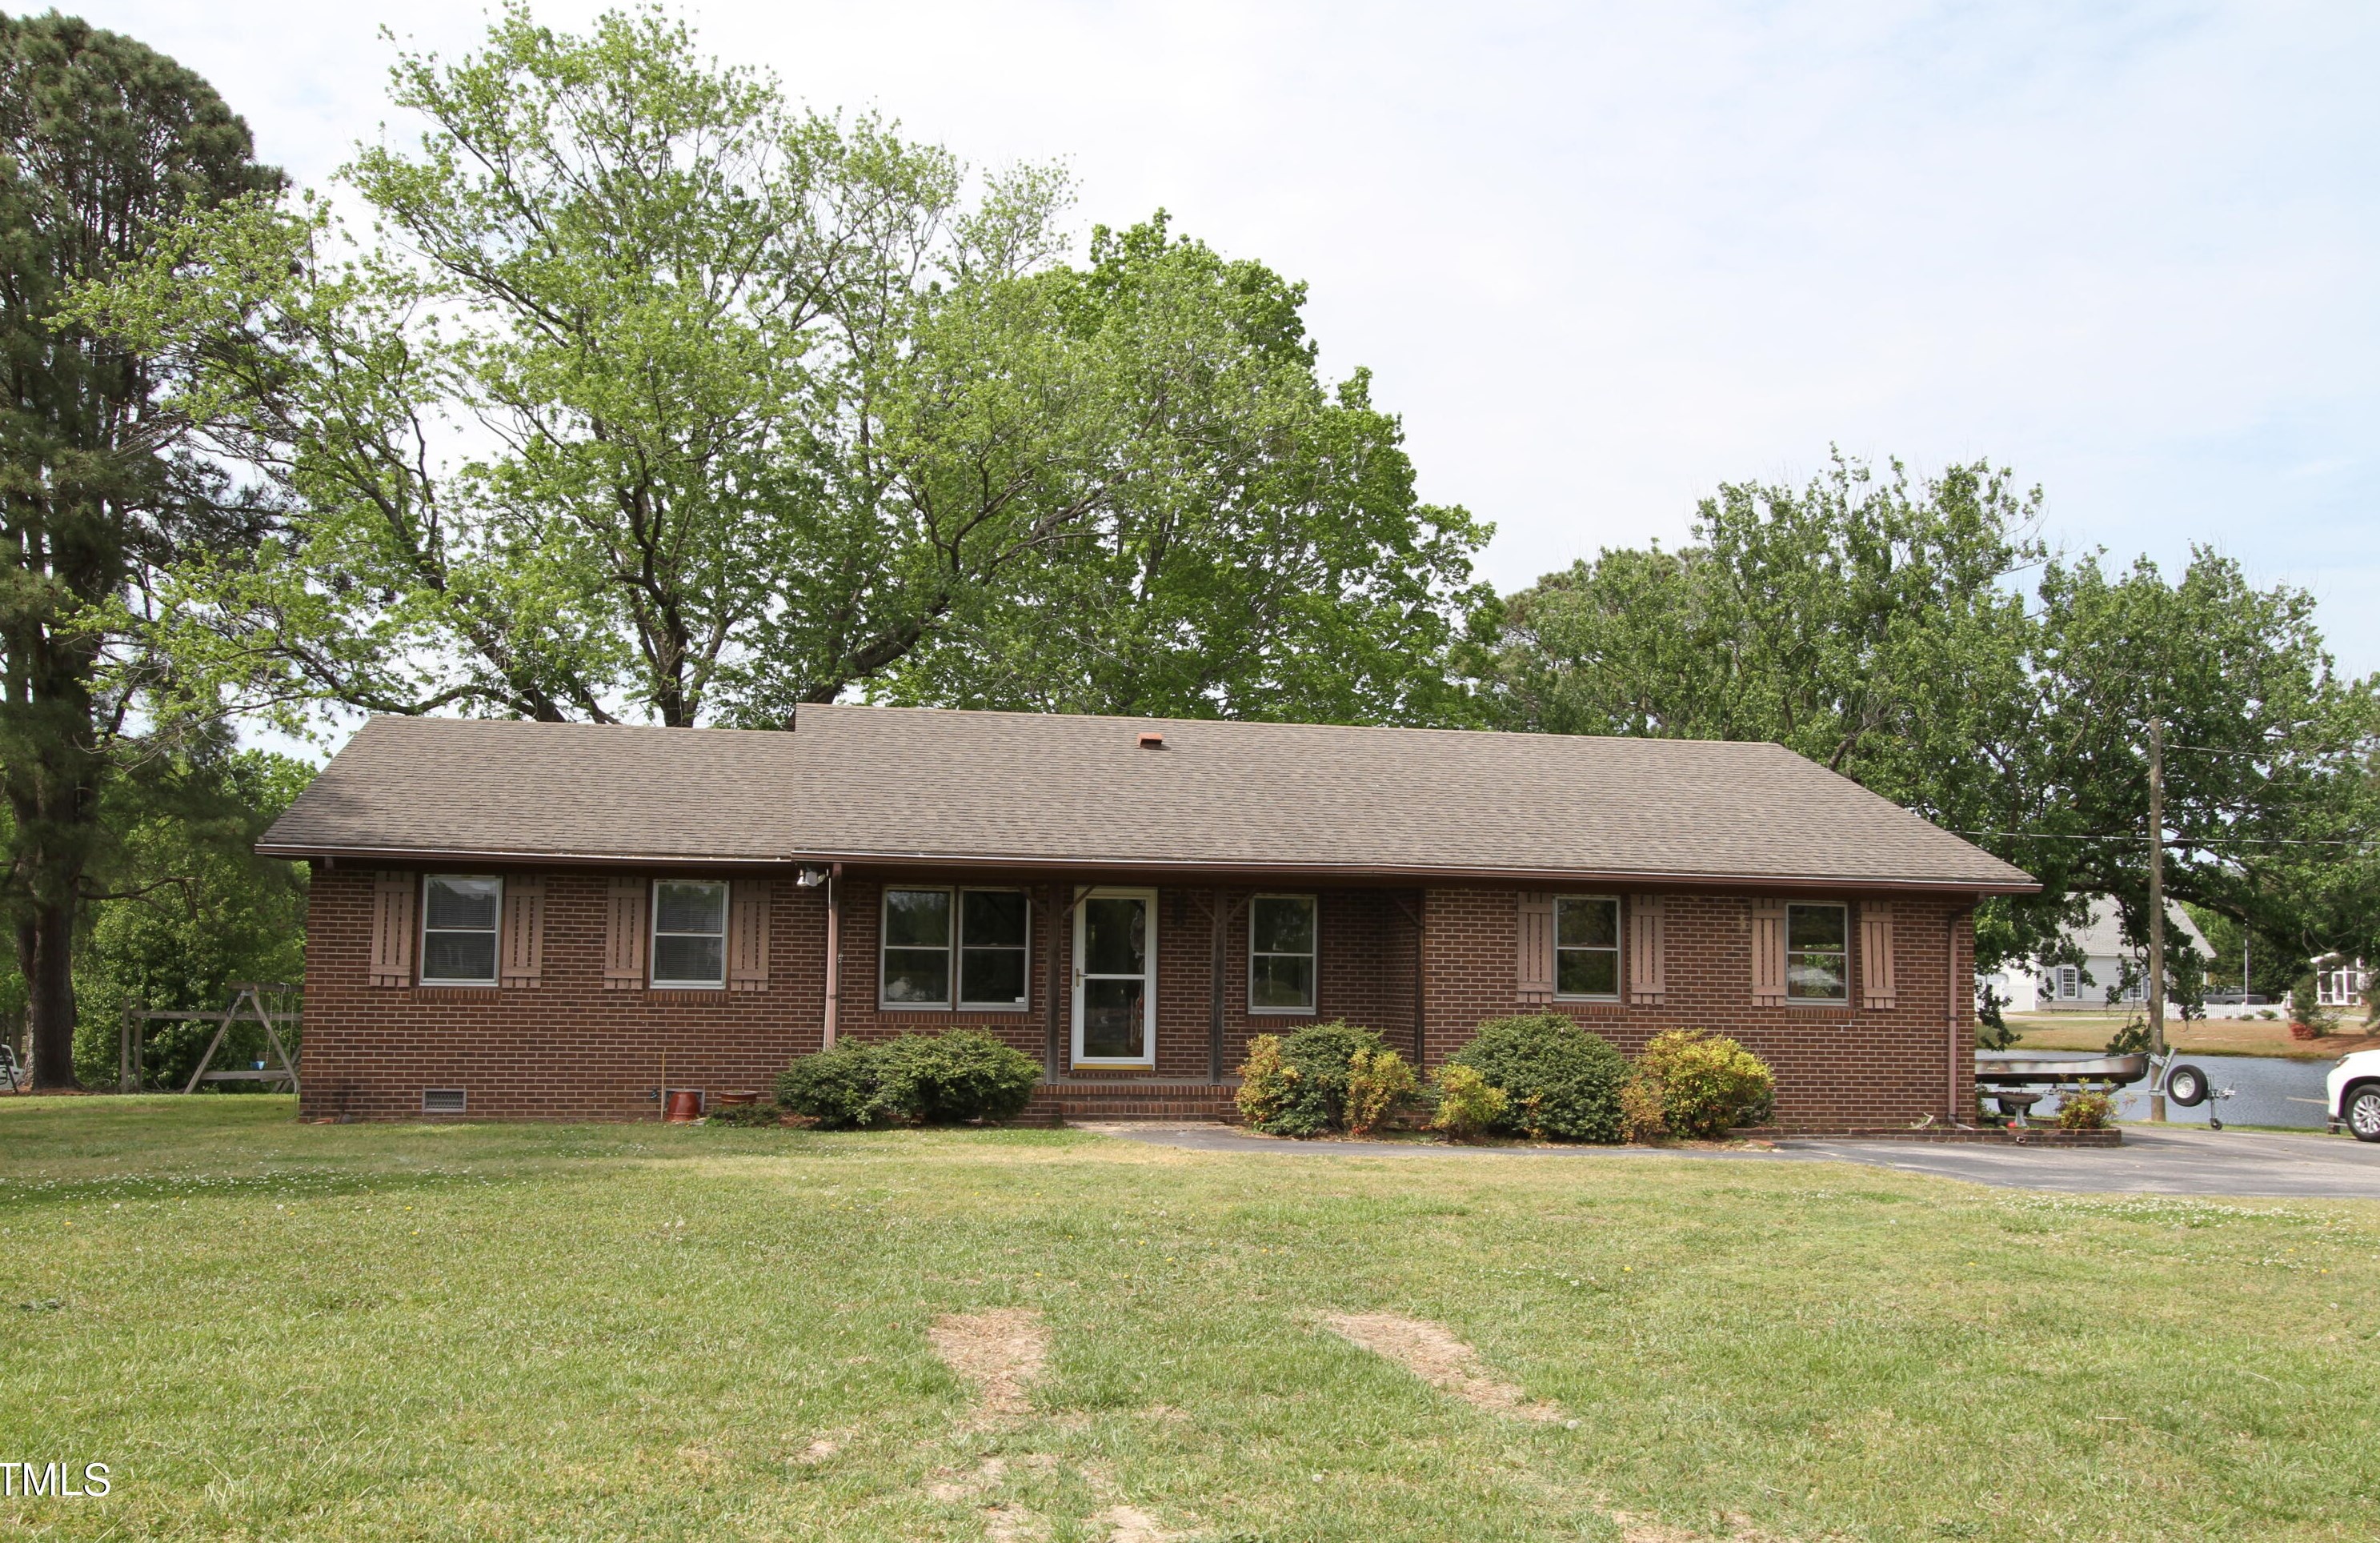 8270 Bend Of The River Rd, Rocky Mount, NC 27803